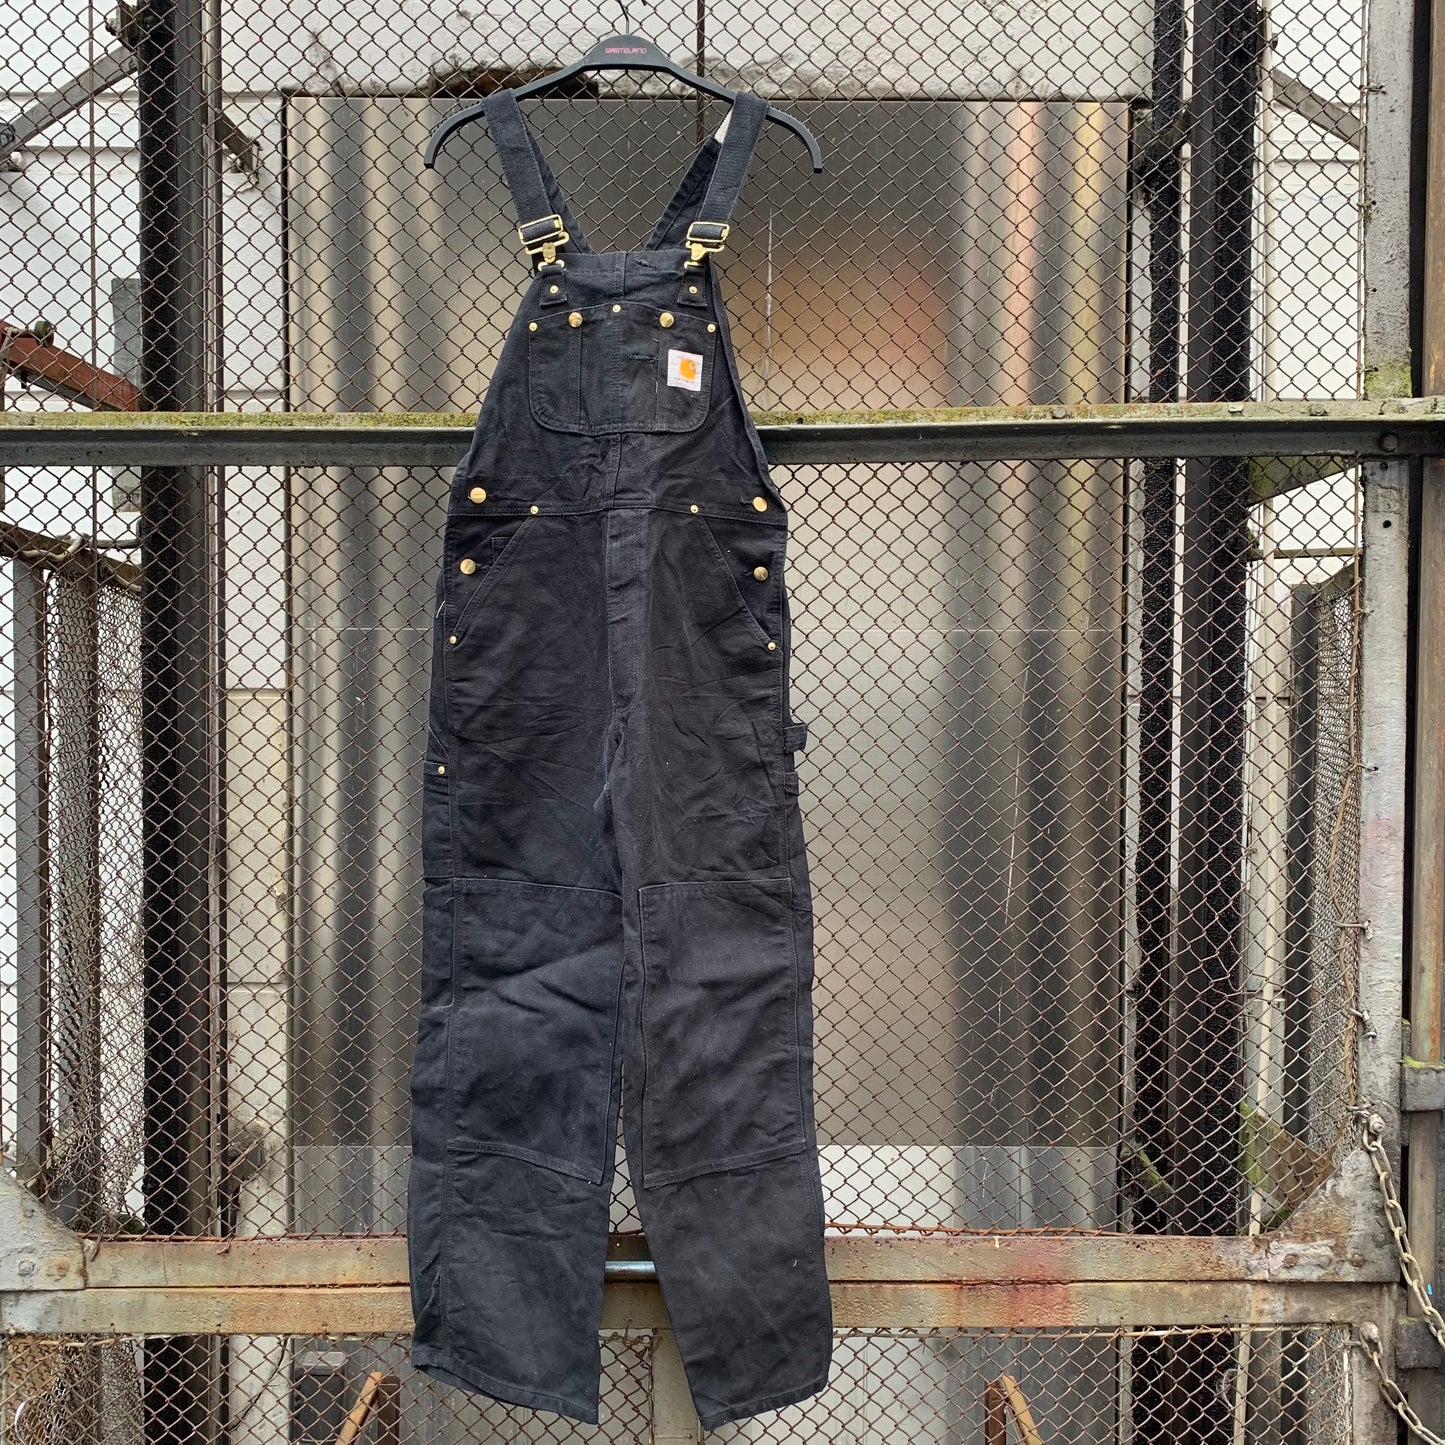 Carhartt Made in USA Black Double Knees Overall